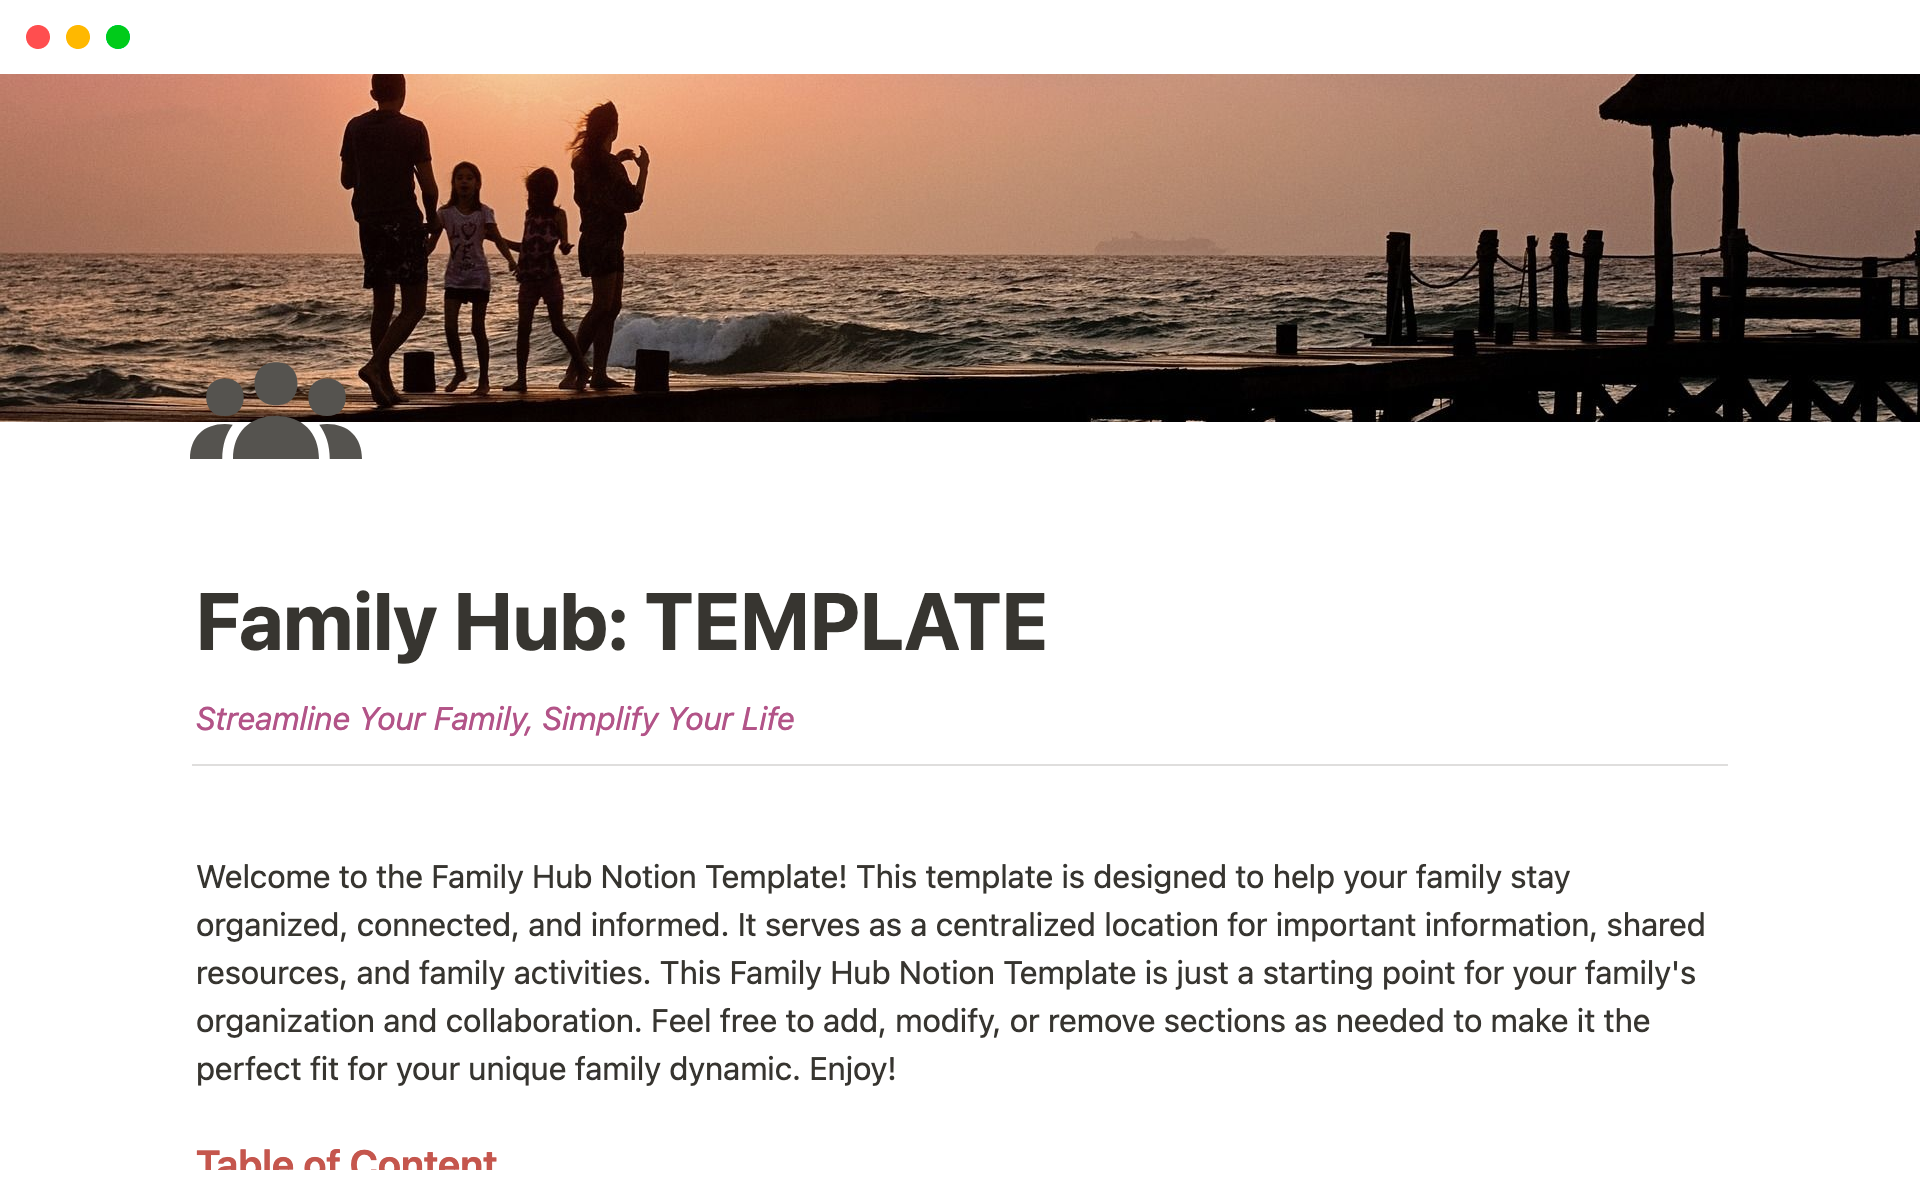 The Family Hub Template is an all-in-one organization system for busy families, helping them easily manage schedules, chores, family activities, and more.